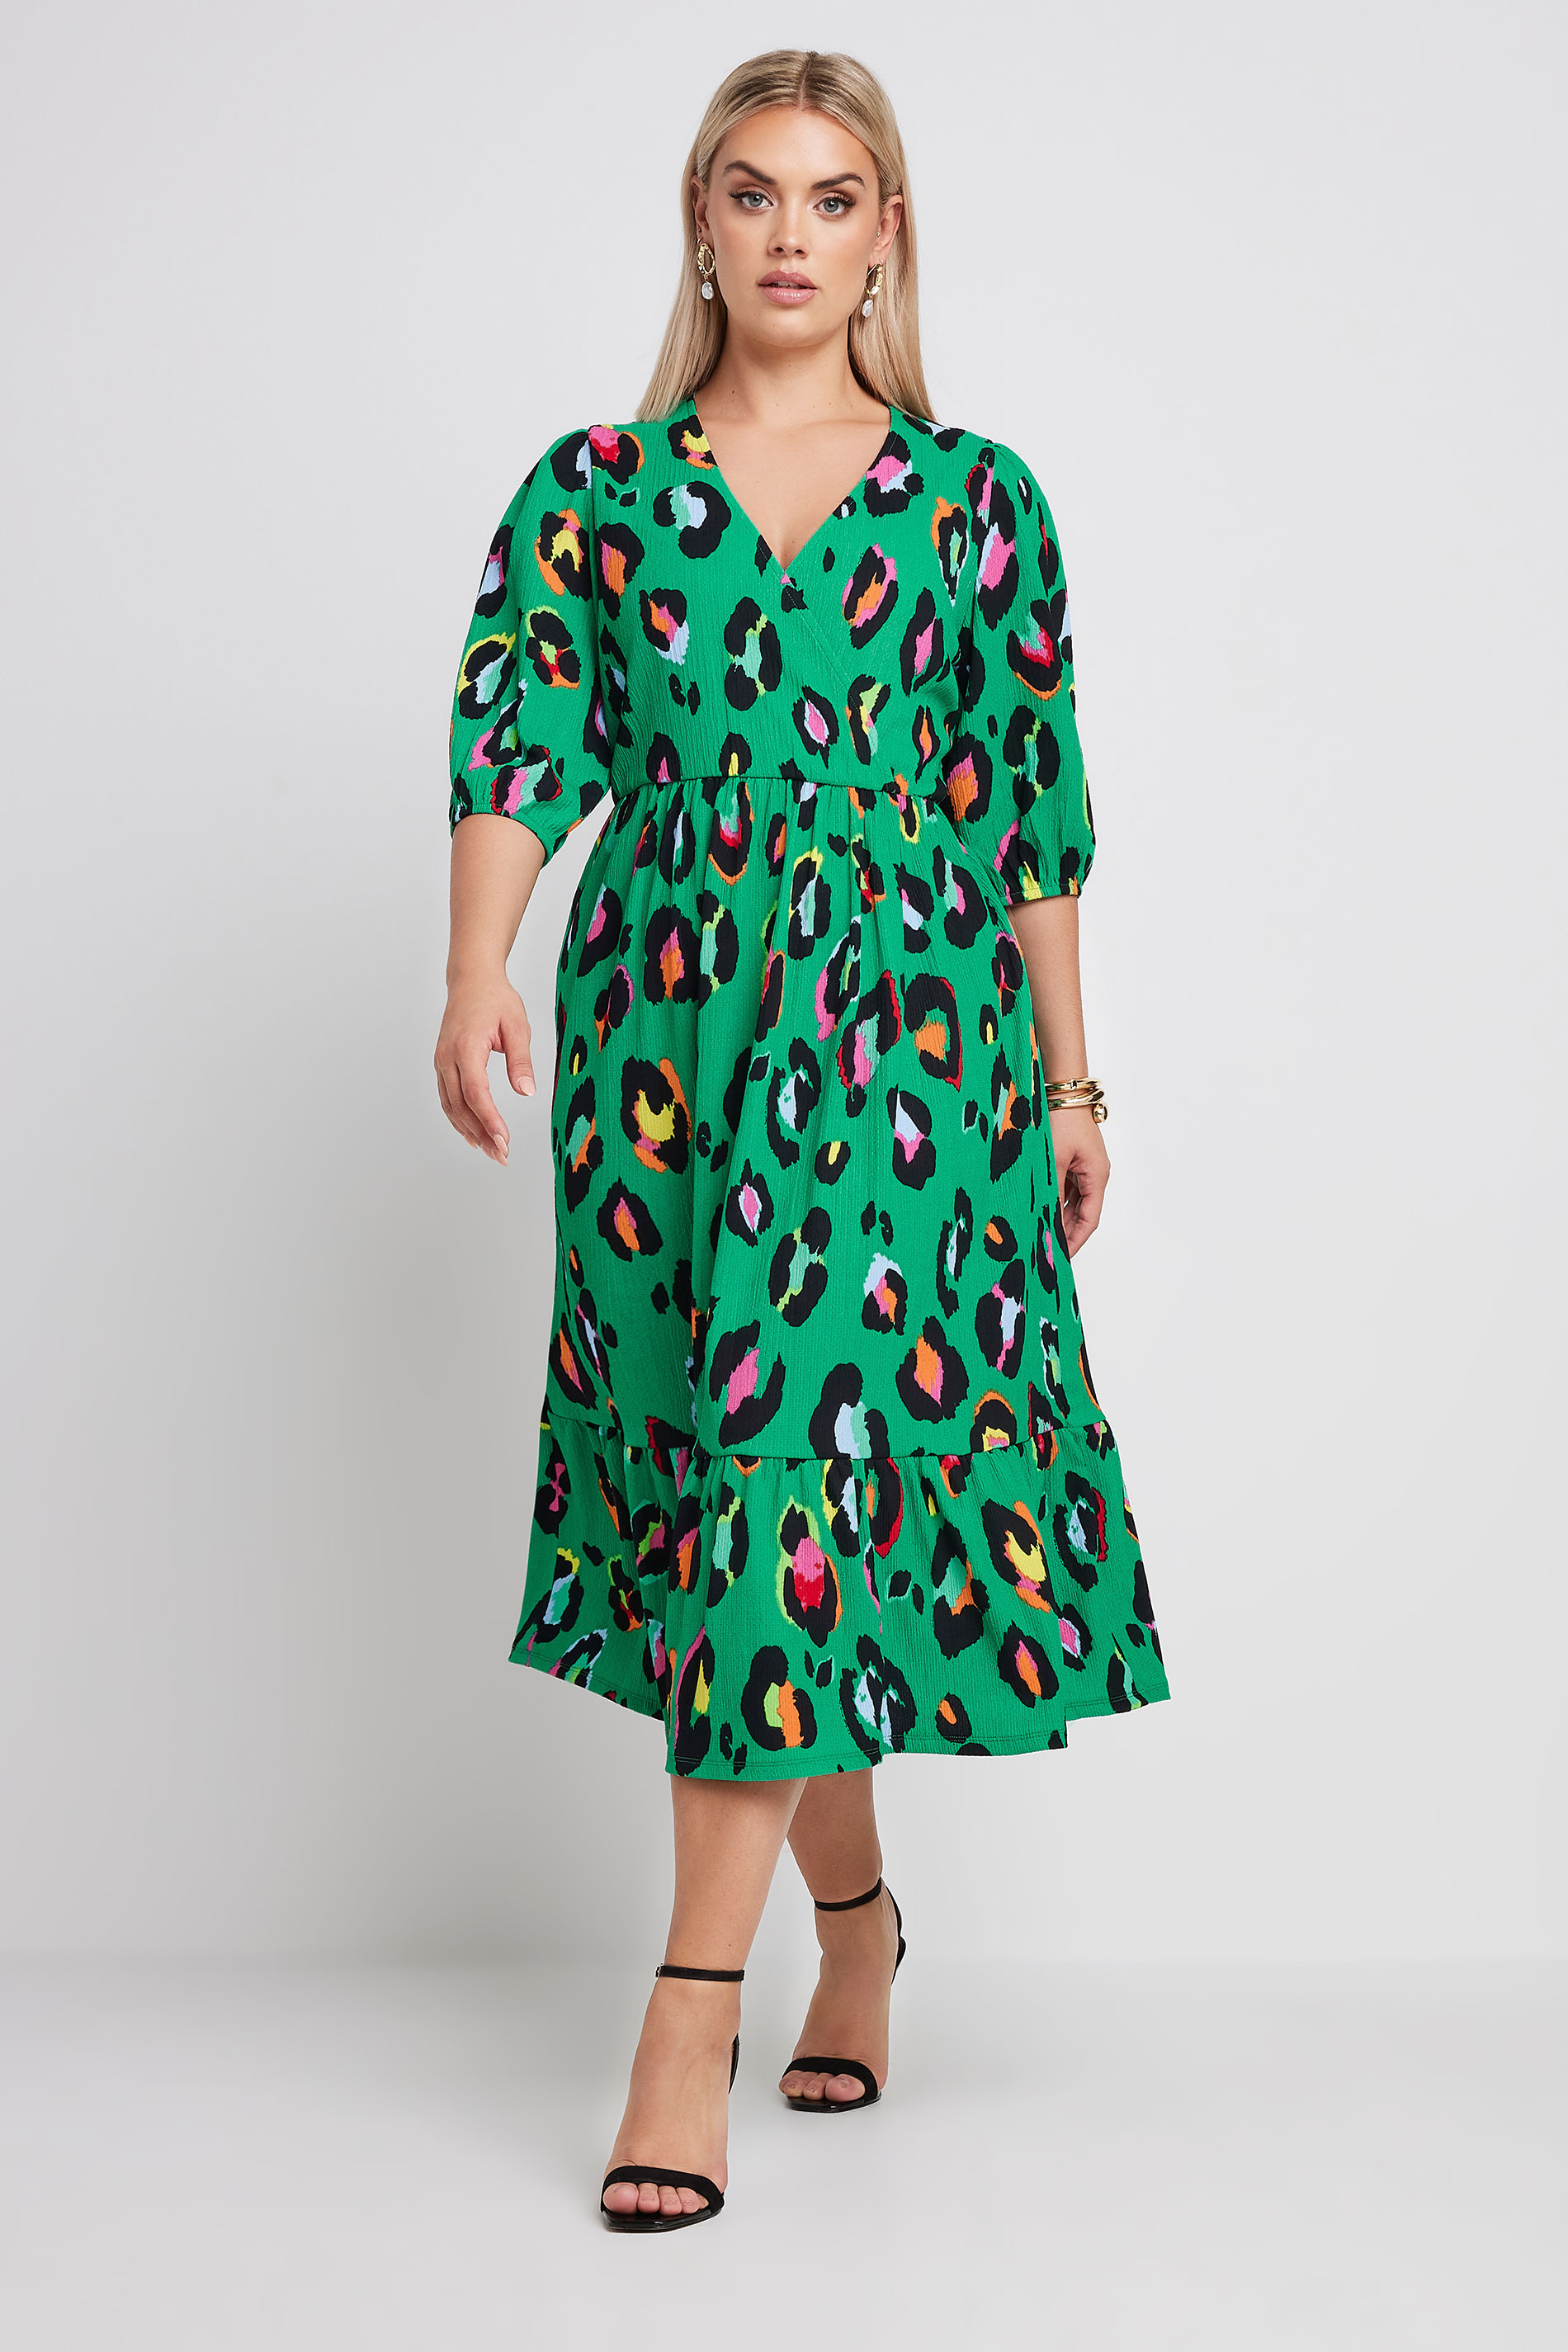 LIMITED COLLECTION Plus Size Green Leopard Print Textured Wrap Dress | Yours Clothing 2